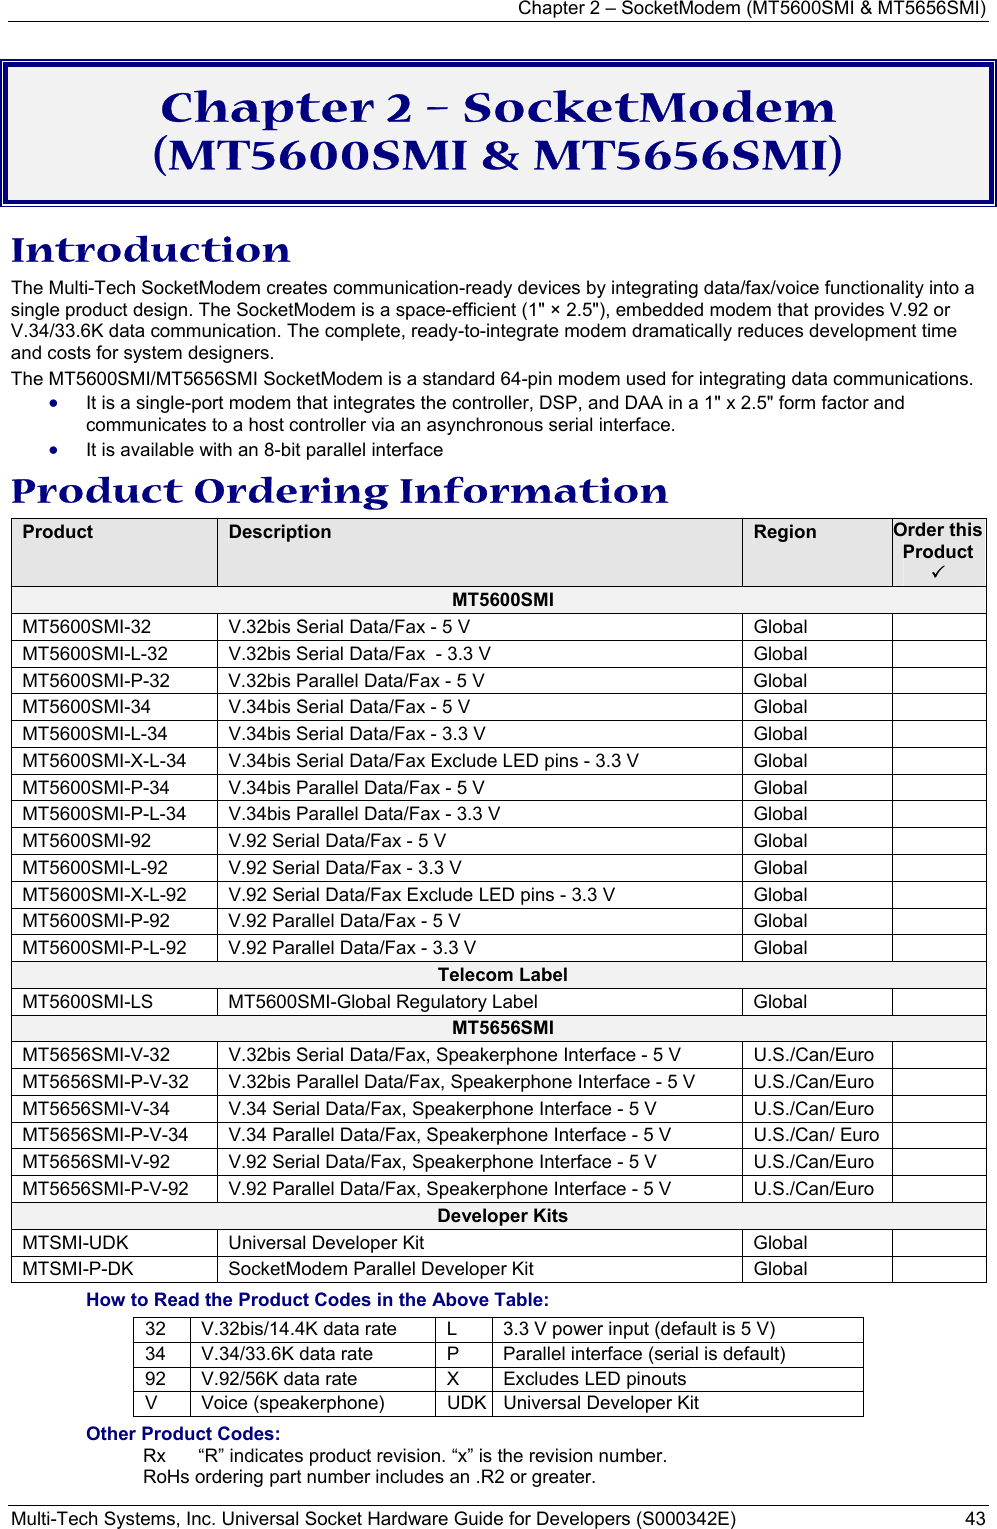 Chapter 2 – SocketModem (MT5600SMI &amp; MT5656SMI) Multi-Tech Systems, Inc. Universal Socket Hardware Guide for Developers (S000342E)  43 Chapter 2 – SocketModem (MT5600SMI &amp; MT5656SMI)  Introduction  The Multi-Tech SocketModem creates communication-ready devices by integrating data/fax/voice functionality into a single product design. The SocketModem is a space-efficient (1&quot; × 2.5&quot;), embedded modem that provides V.92 or V.34/33.6K data communication. The complete, ready-to-integrate modem dramatically reduces development time and costs for system designers.  The MT5600SMI/MT5656SMI SocketModem is a standard 64-pin modem used for integrating data communications.  • It is a single-port modem that integrates the controller, DSP, and DAA in a 1&quot; x 2.5&quot; form factor and communicates to a host controller via an asynchronous serial interface. • It is available with an 8-bit parallel interface Product Ordering Information Product  Description  Region  Order this Product 3 MT5600SMI MT5600SMI-32  V.32bis Serial Data/Fax - 5 V             Global   MT5600SMI-L-32  V.32bis Serial Data/Fax  - 3.3 V           Global   MT5600SMI-P-32  V.32bis Parallel Data/Fax - 5 V            Global   MT5600SMI-34  V.34bis Serial Data/Fax - 5 V             Global   MT5600SMI-L-34  V.34bis Serial Data/Fax - 3.3 V           Global   MT5600SMI-X-L-34  V.34bis Serial Data/Fax Exclude LED pins - 3.3 V   Global   MT5600SMI-P-34  V.34bis Parallel Data/Fax - 5 V           Global   MT5600SMI-P-L-34  V.34bis Parallel Data/Fax - 3.3 V           Global   MT5600SMI-92  V.92 Serial Data/Fax - 5 V              Global   MT5600SMI-L-92  V.92 Serial Data/Fax - 3.3 V             Global   MT5600SMI-X-L-92  V.92 Serial Data/Fax Exclude LED pins - 3.3 V     Global   MT5600SMI-P-92  V.92 Parallel Data/Fax - 5 V             Global   MT5600SMI-P-L-92  V.92 Parallel Data/Fax - 3.3 V             Global   Telecom Label MT5600SMI-LS  MT5600SMI-Global Regulatory Label  Global   MT5656SMI MT5656SMI-V-32  V.32bis Serial Data/Fax, Speakerphone Interface - 5 V  U.S./Can/Euro   MT5656SMI-P-V-32  V.32bis Parallel Data/Fax, Speakerphone Interface - 5 V   U.S./Can/Euro   MT5656SMI-V-34  V.34 Serial Data/Fax, Speakerphone Interface - 5 V  U.S./Can/Euro   MT5656SMI-P-V-34  V.34 Parallel Data/Fax, Speakerphone Interface - 5 V  U.S./Can/ Euro   MT5656SMI-V-92  V.92 Serial Data/Fax, Speakerphone Interface - 5 V  U.S./Can/Euro   MT5656SMI-P-V-92  V.92 Parallel Data/Fax, Speakerphone Interface - 5 V  U.S./Can/Euro   Developer Kits MTSMI-UDK  Universal Developer Kit  Global   MTSMI-P-DK  SocketModem Parallel Developer Kit  Global   How to Read the Product Codes in the Above Table: 32  V.32bis/14.4K data rate  L  3.3 V power input (default is 5 V) 34  V.34/33.6K data rate  P  Parallel interface (serial is default) 92  V.92/56K data rate  X  Excludes LED pinouts V  Voice (speakerphone)  UDK Universal Developer Kit Other Product Codes: Rx  “R” indicates product revision. “x” is the revision number. RoHs ordering part number includes an .R2 or greater. 